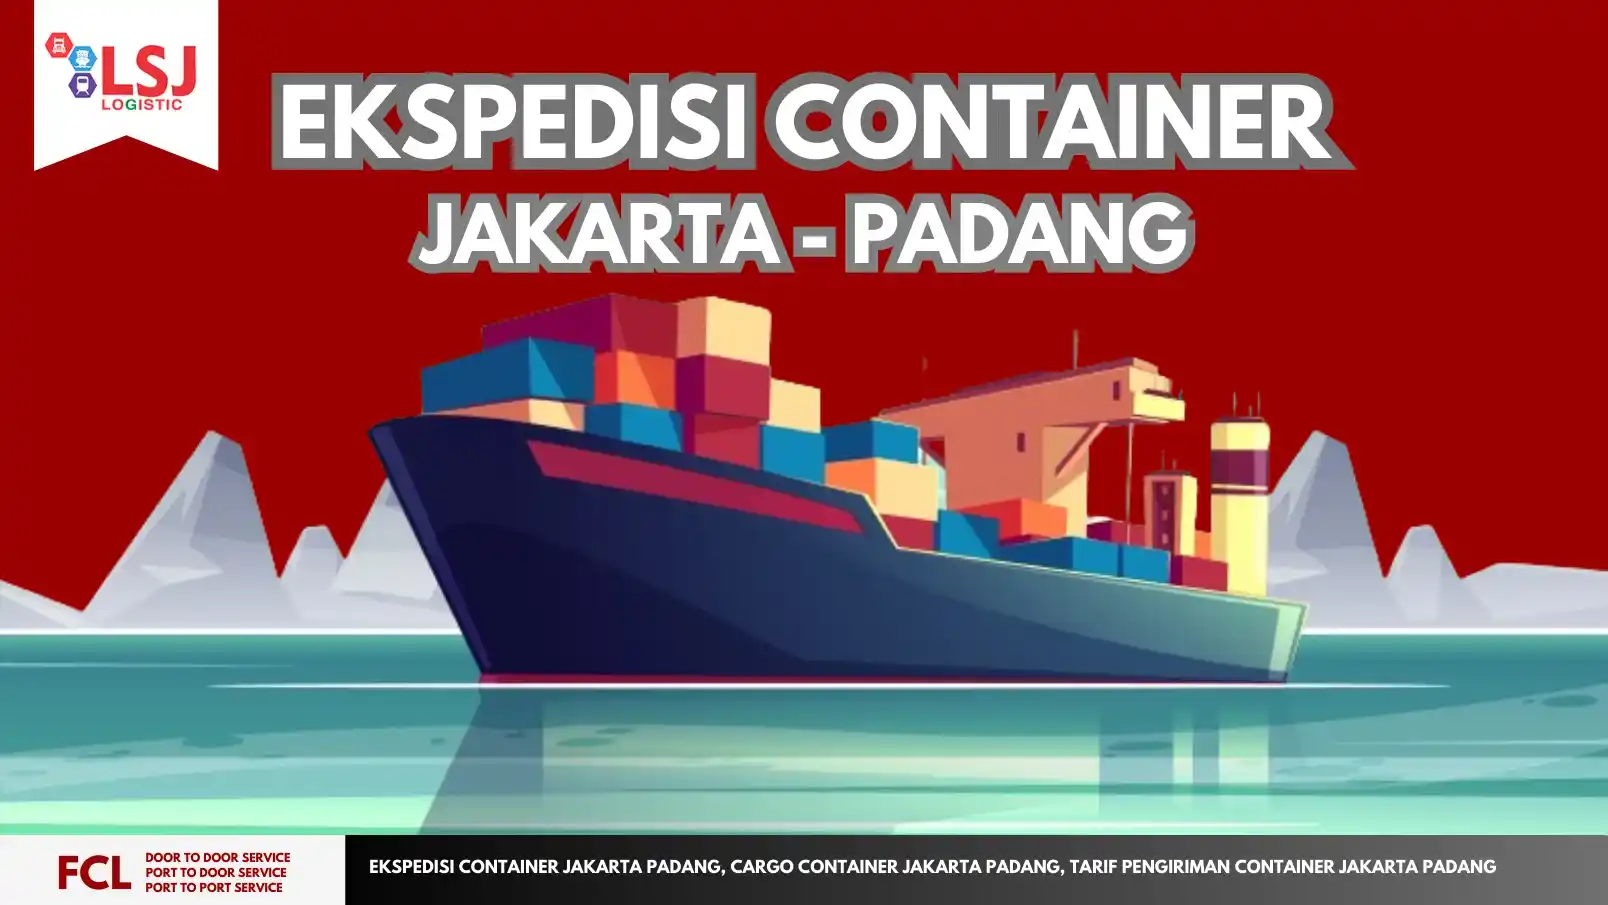 Cargo Container Jakarta Padang